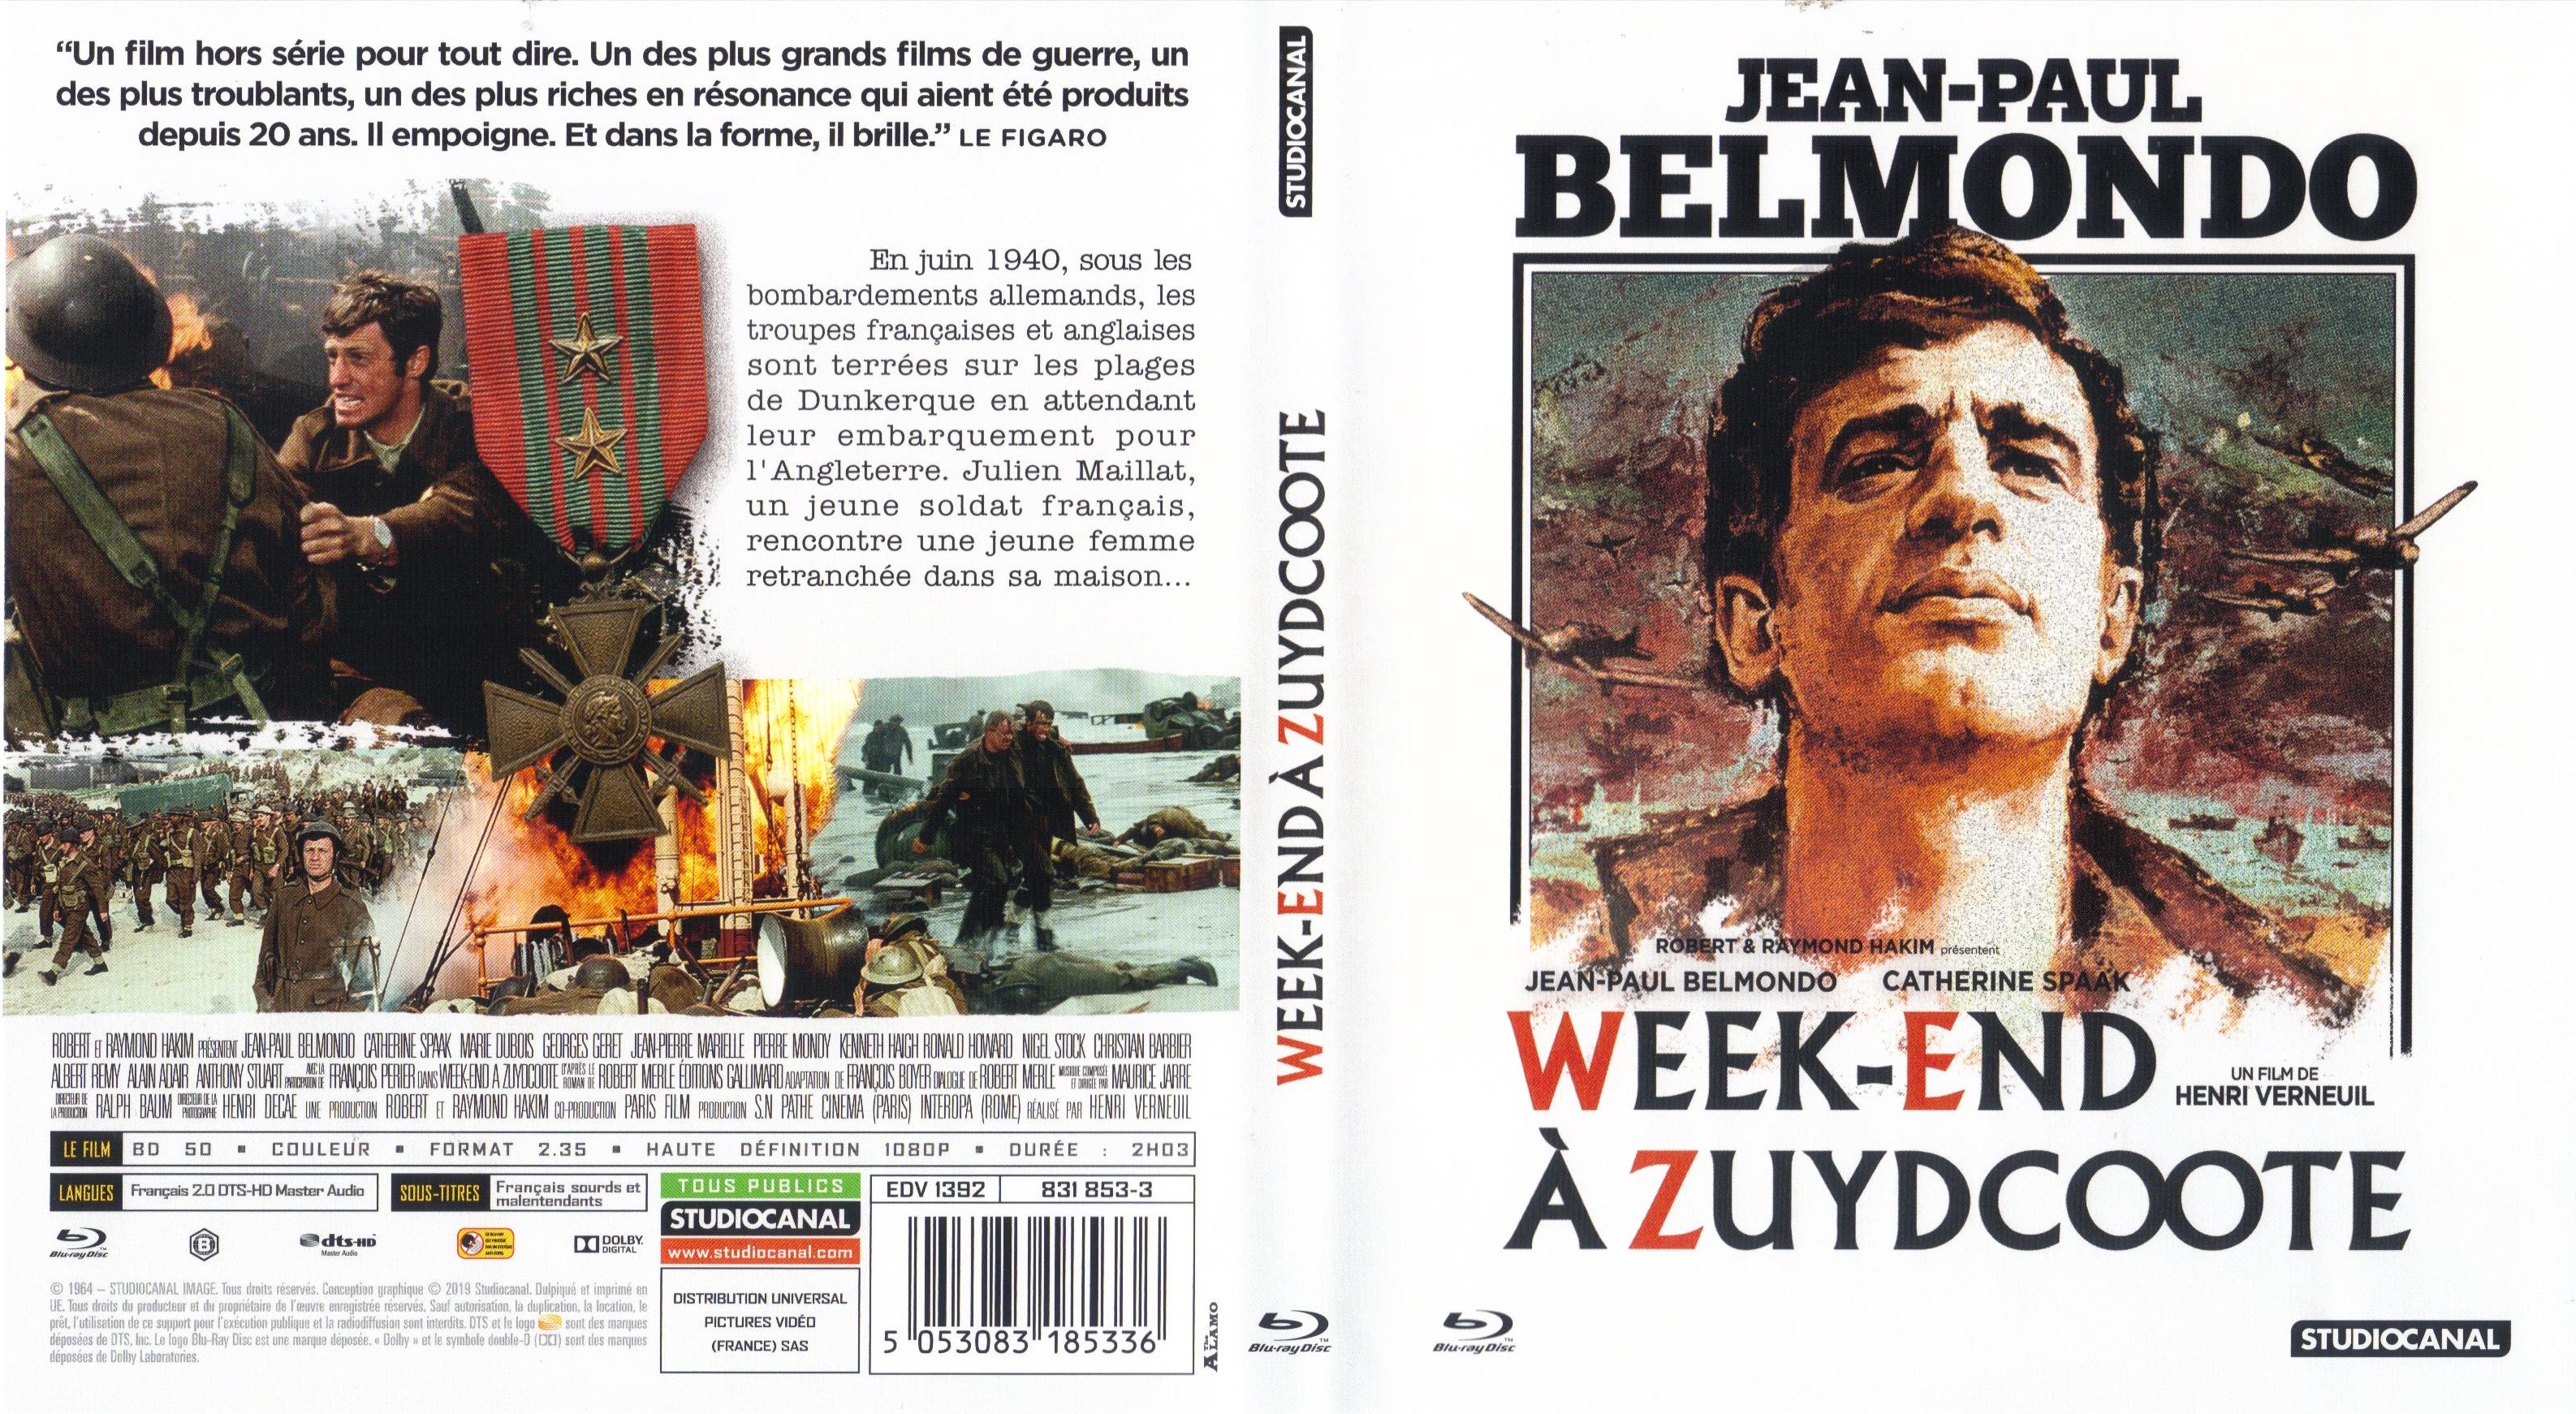 Jaquette DVD Week-end  Zuydcoote (BLU-RAY)